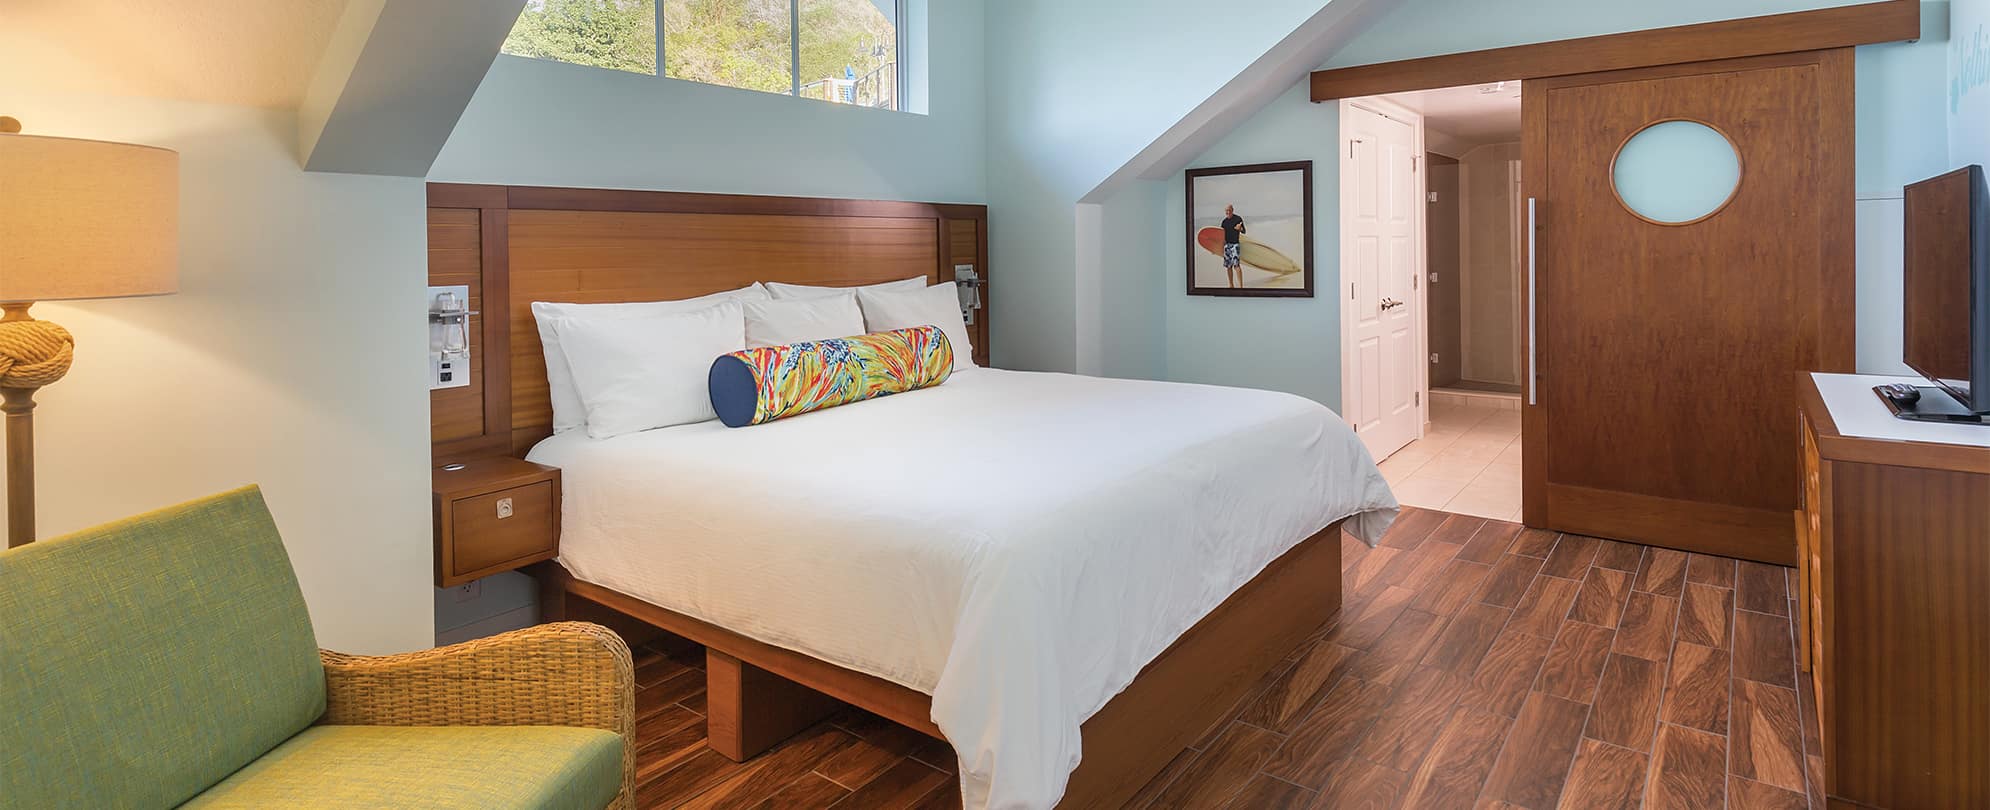 Crisp white linens on a resort bed in a suite at Margaritaville Vacation Club by Wyndham - St. Thomas.